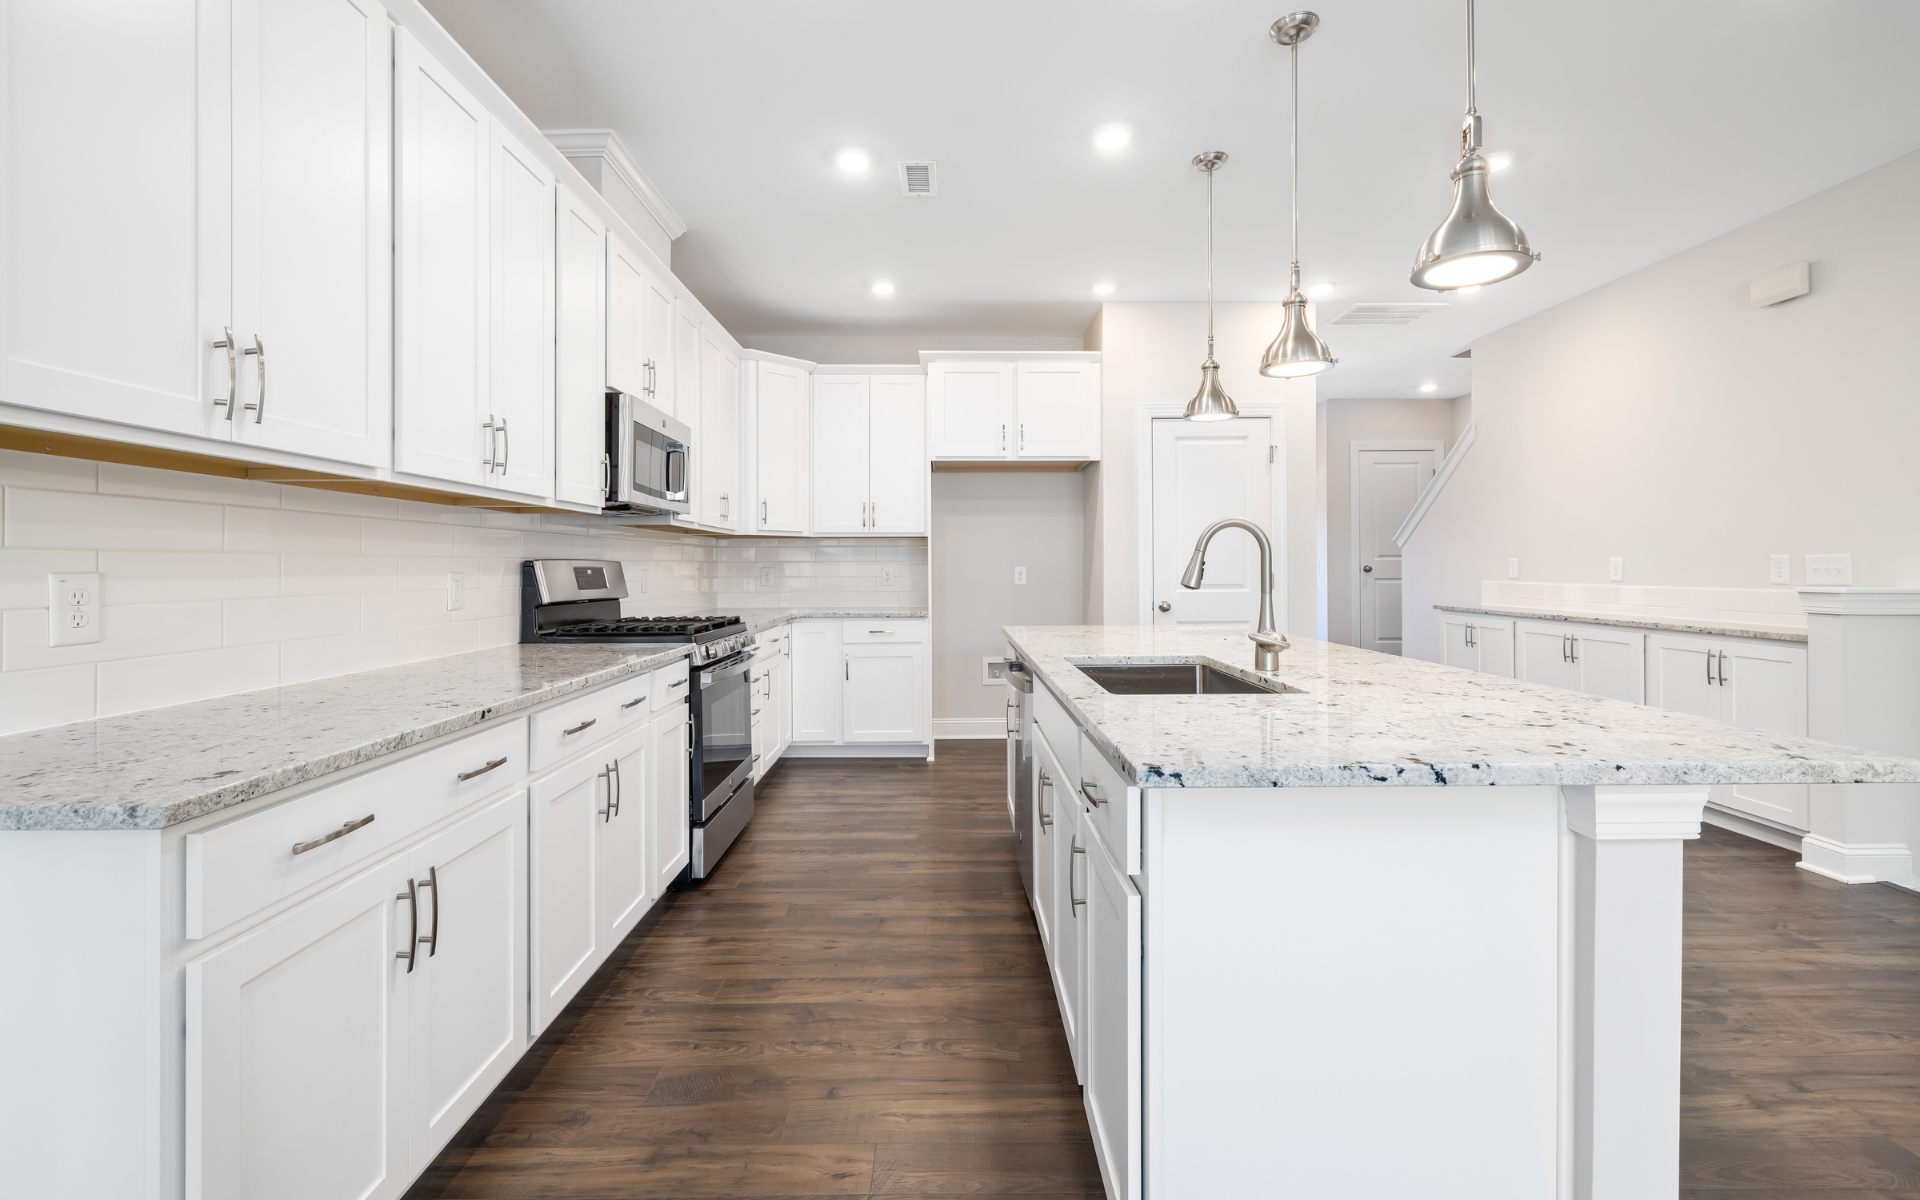 Bright white kitchen with shaker cabinets